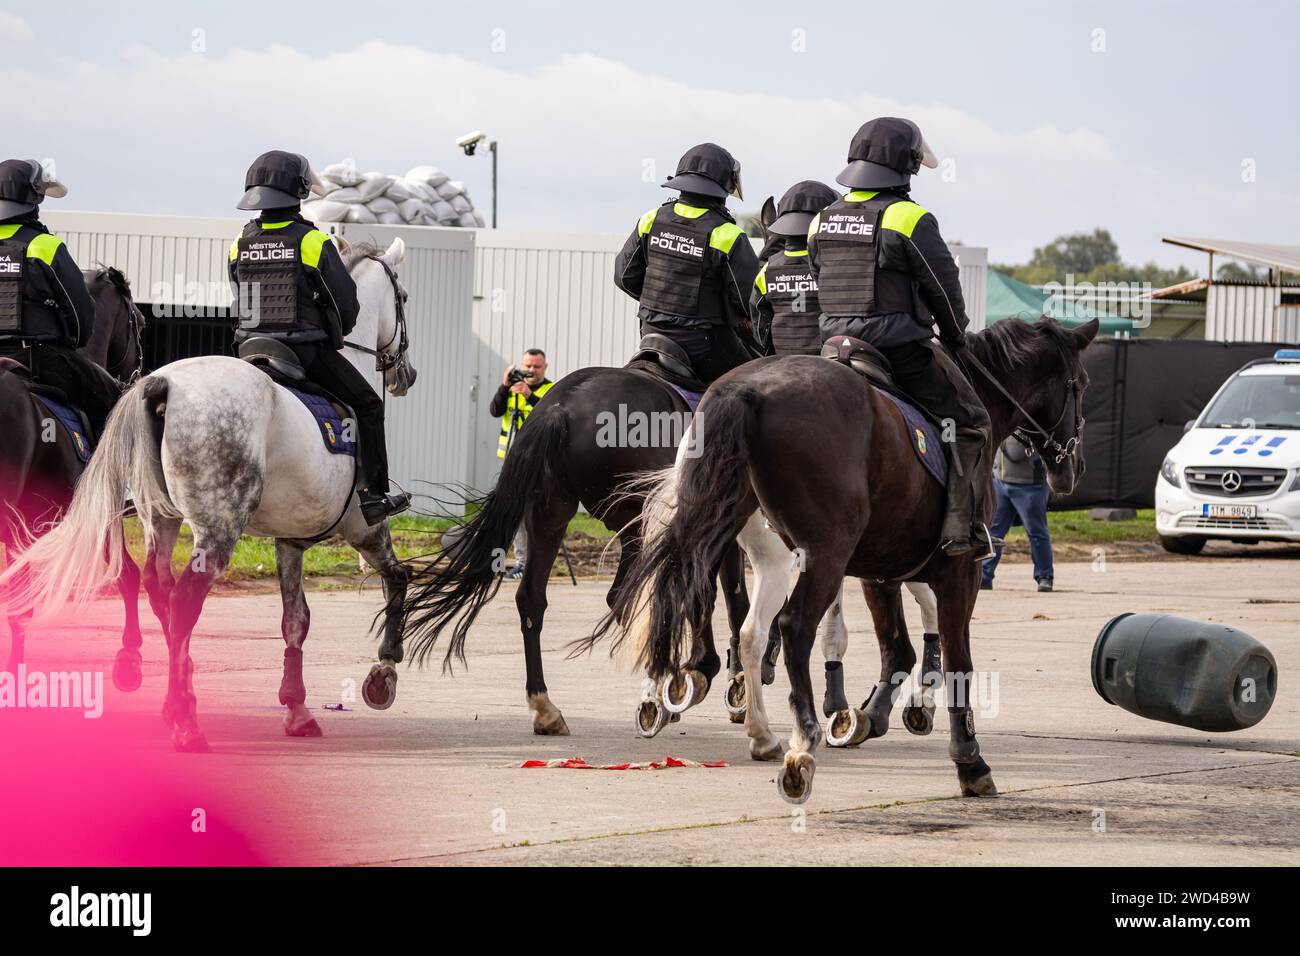 Riot police on horseback. Czech Republic city police officers mounted on horses riding their steeds into a crowd of protestors during a demonstration. Stock Photo